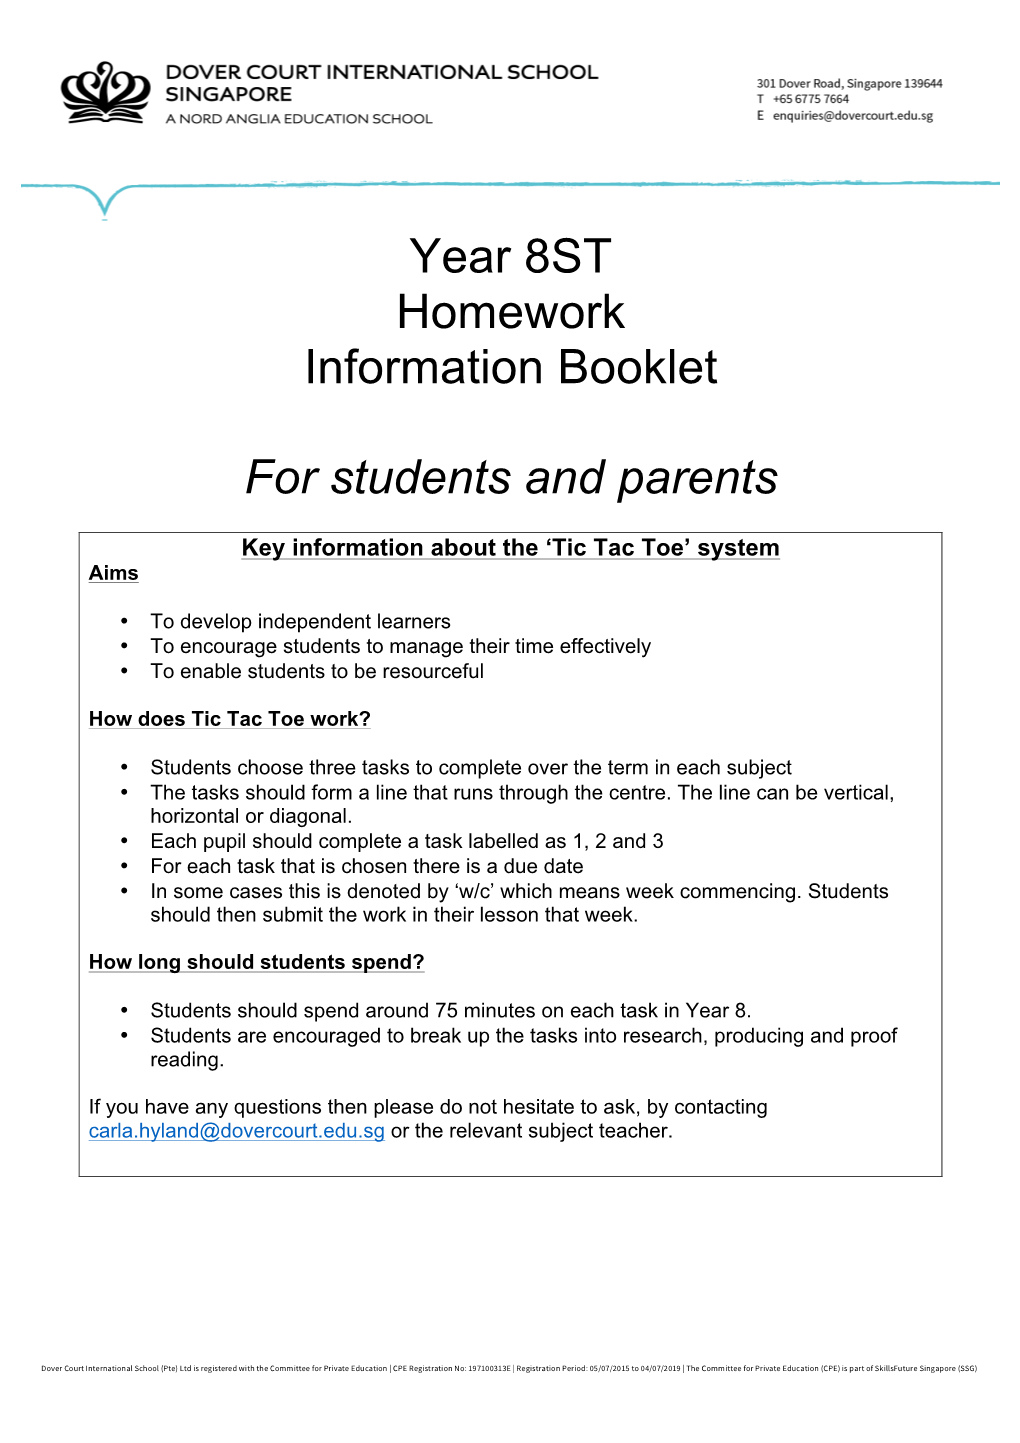 Year 8ST Homework Information Booklet for Students and Parents